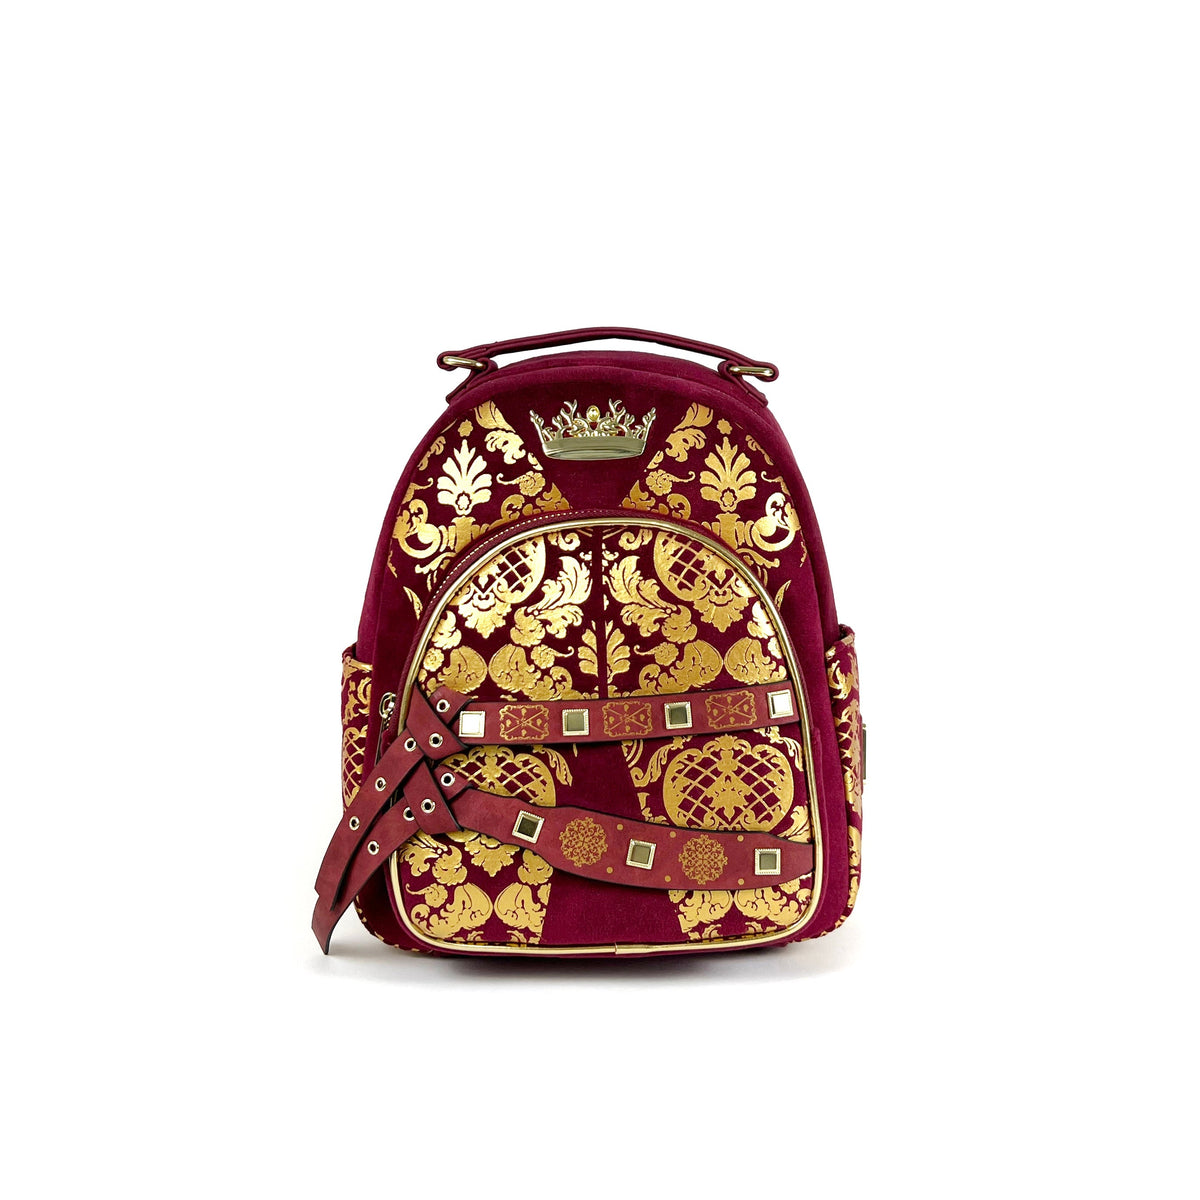 Game of Thrones Cersei US Exclusive Mini Backpack